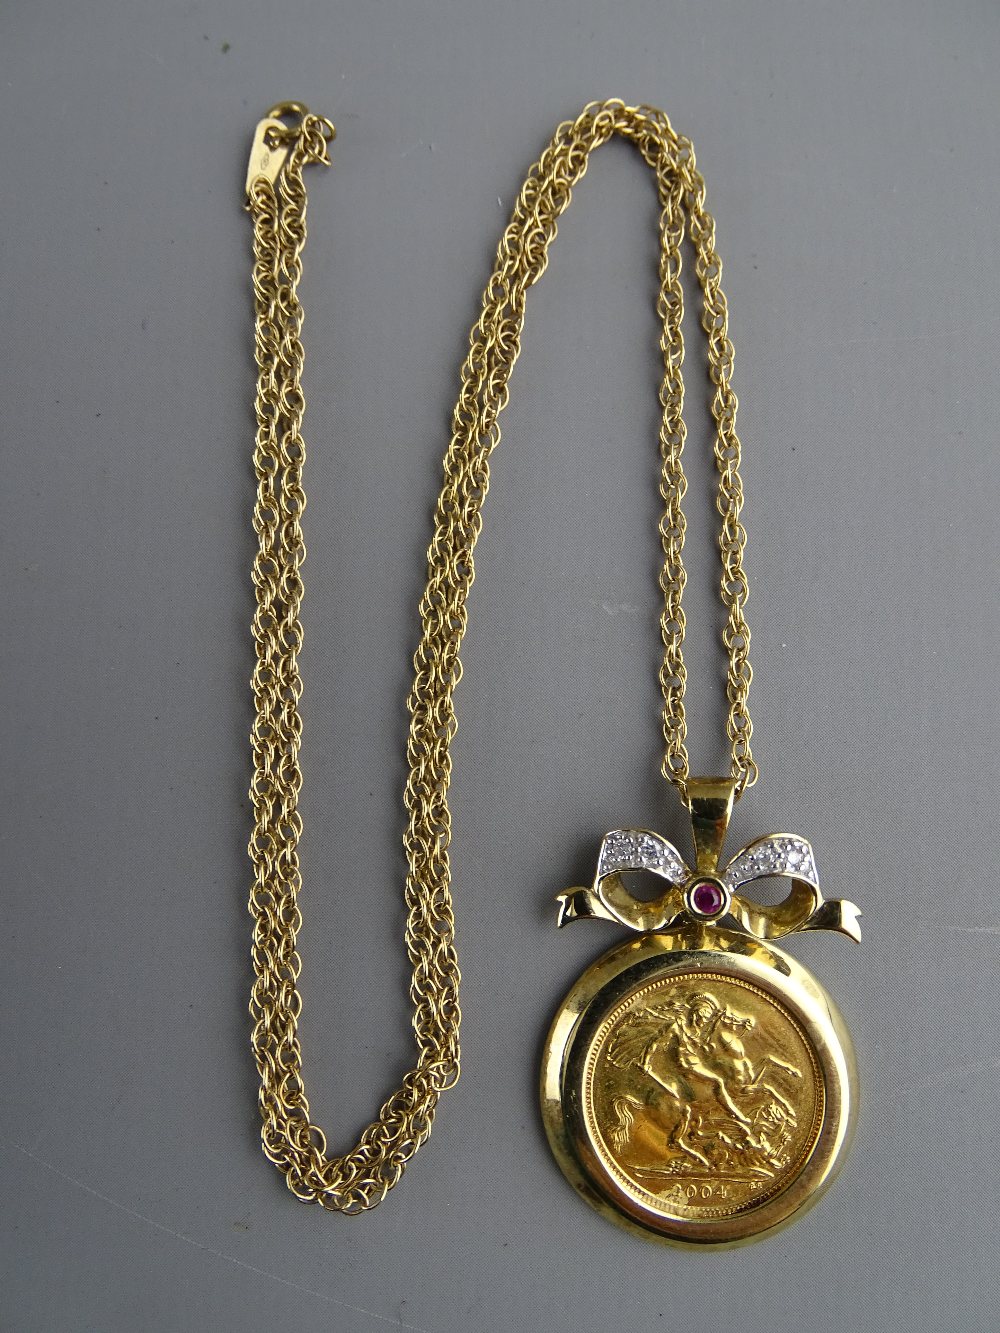 A NINE CARAT GOLD NECK CHAIN with decorative bow link to a gold mounted half sovereign 2004, total